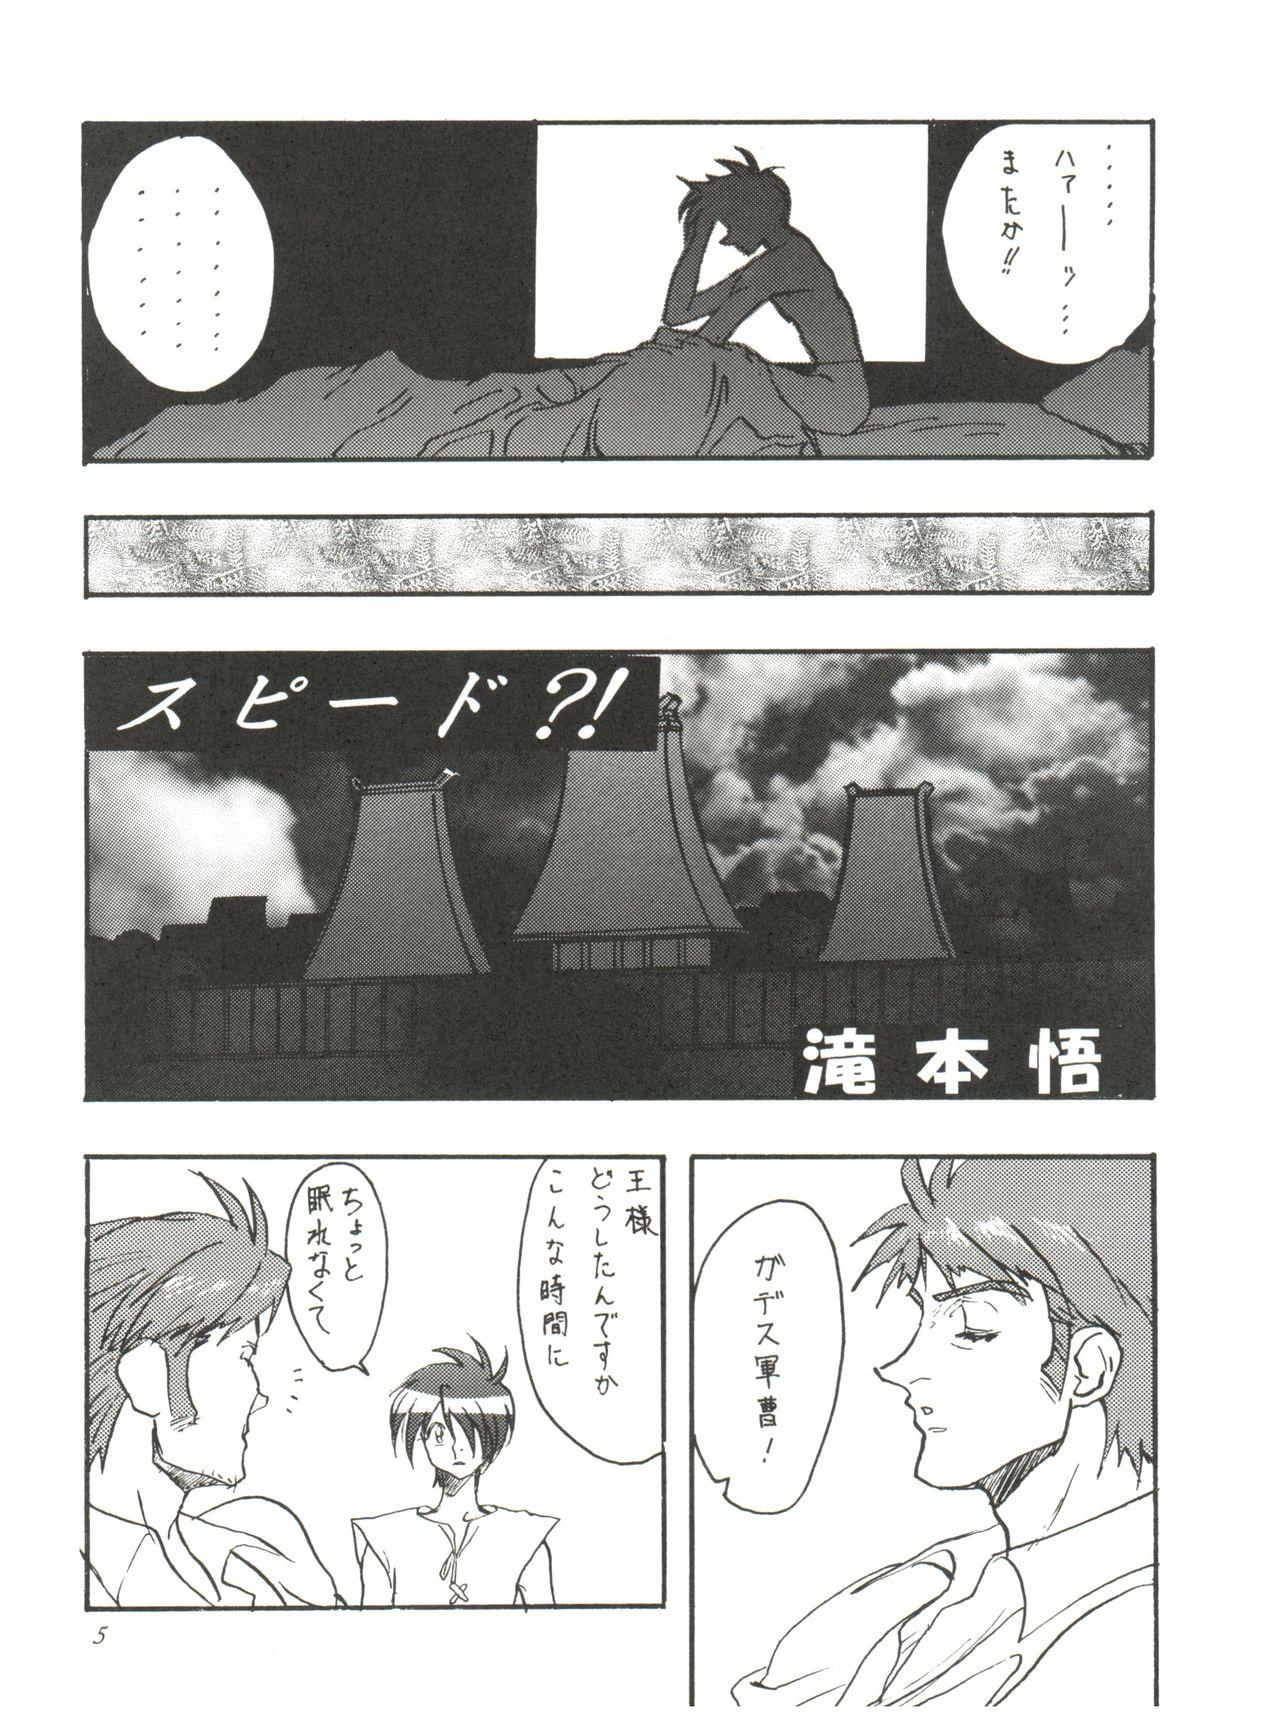 Francaise AREA CODE III - Detective conan The vision of escaflowne Yanks Featured - Page 4